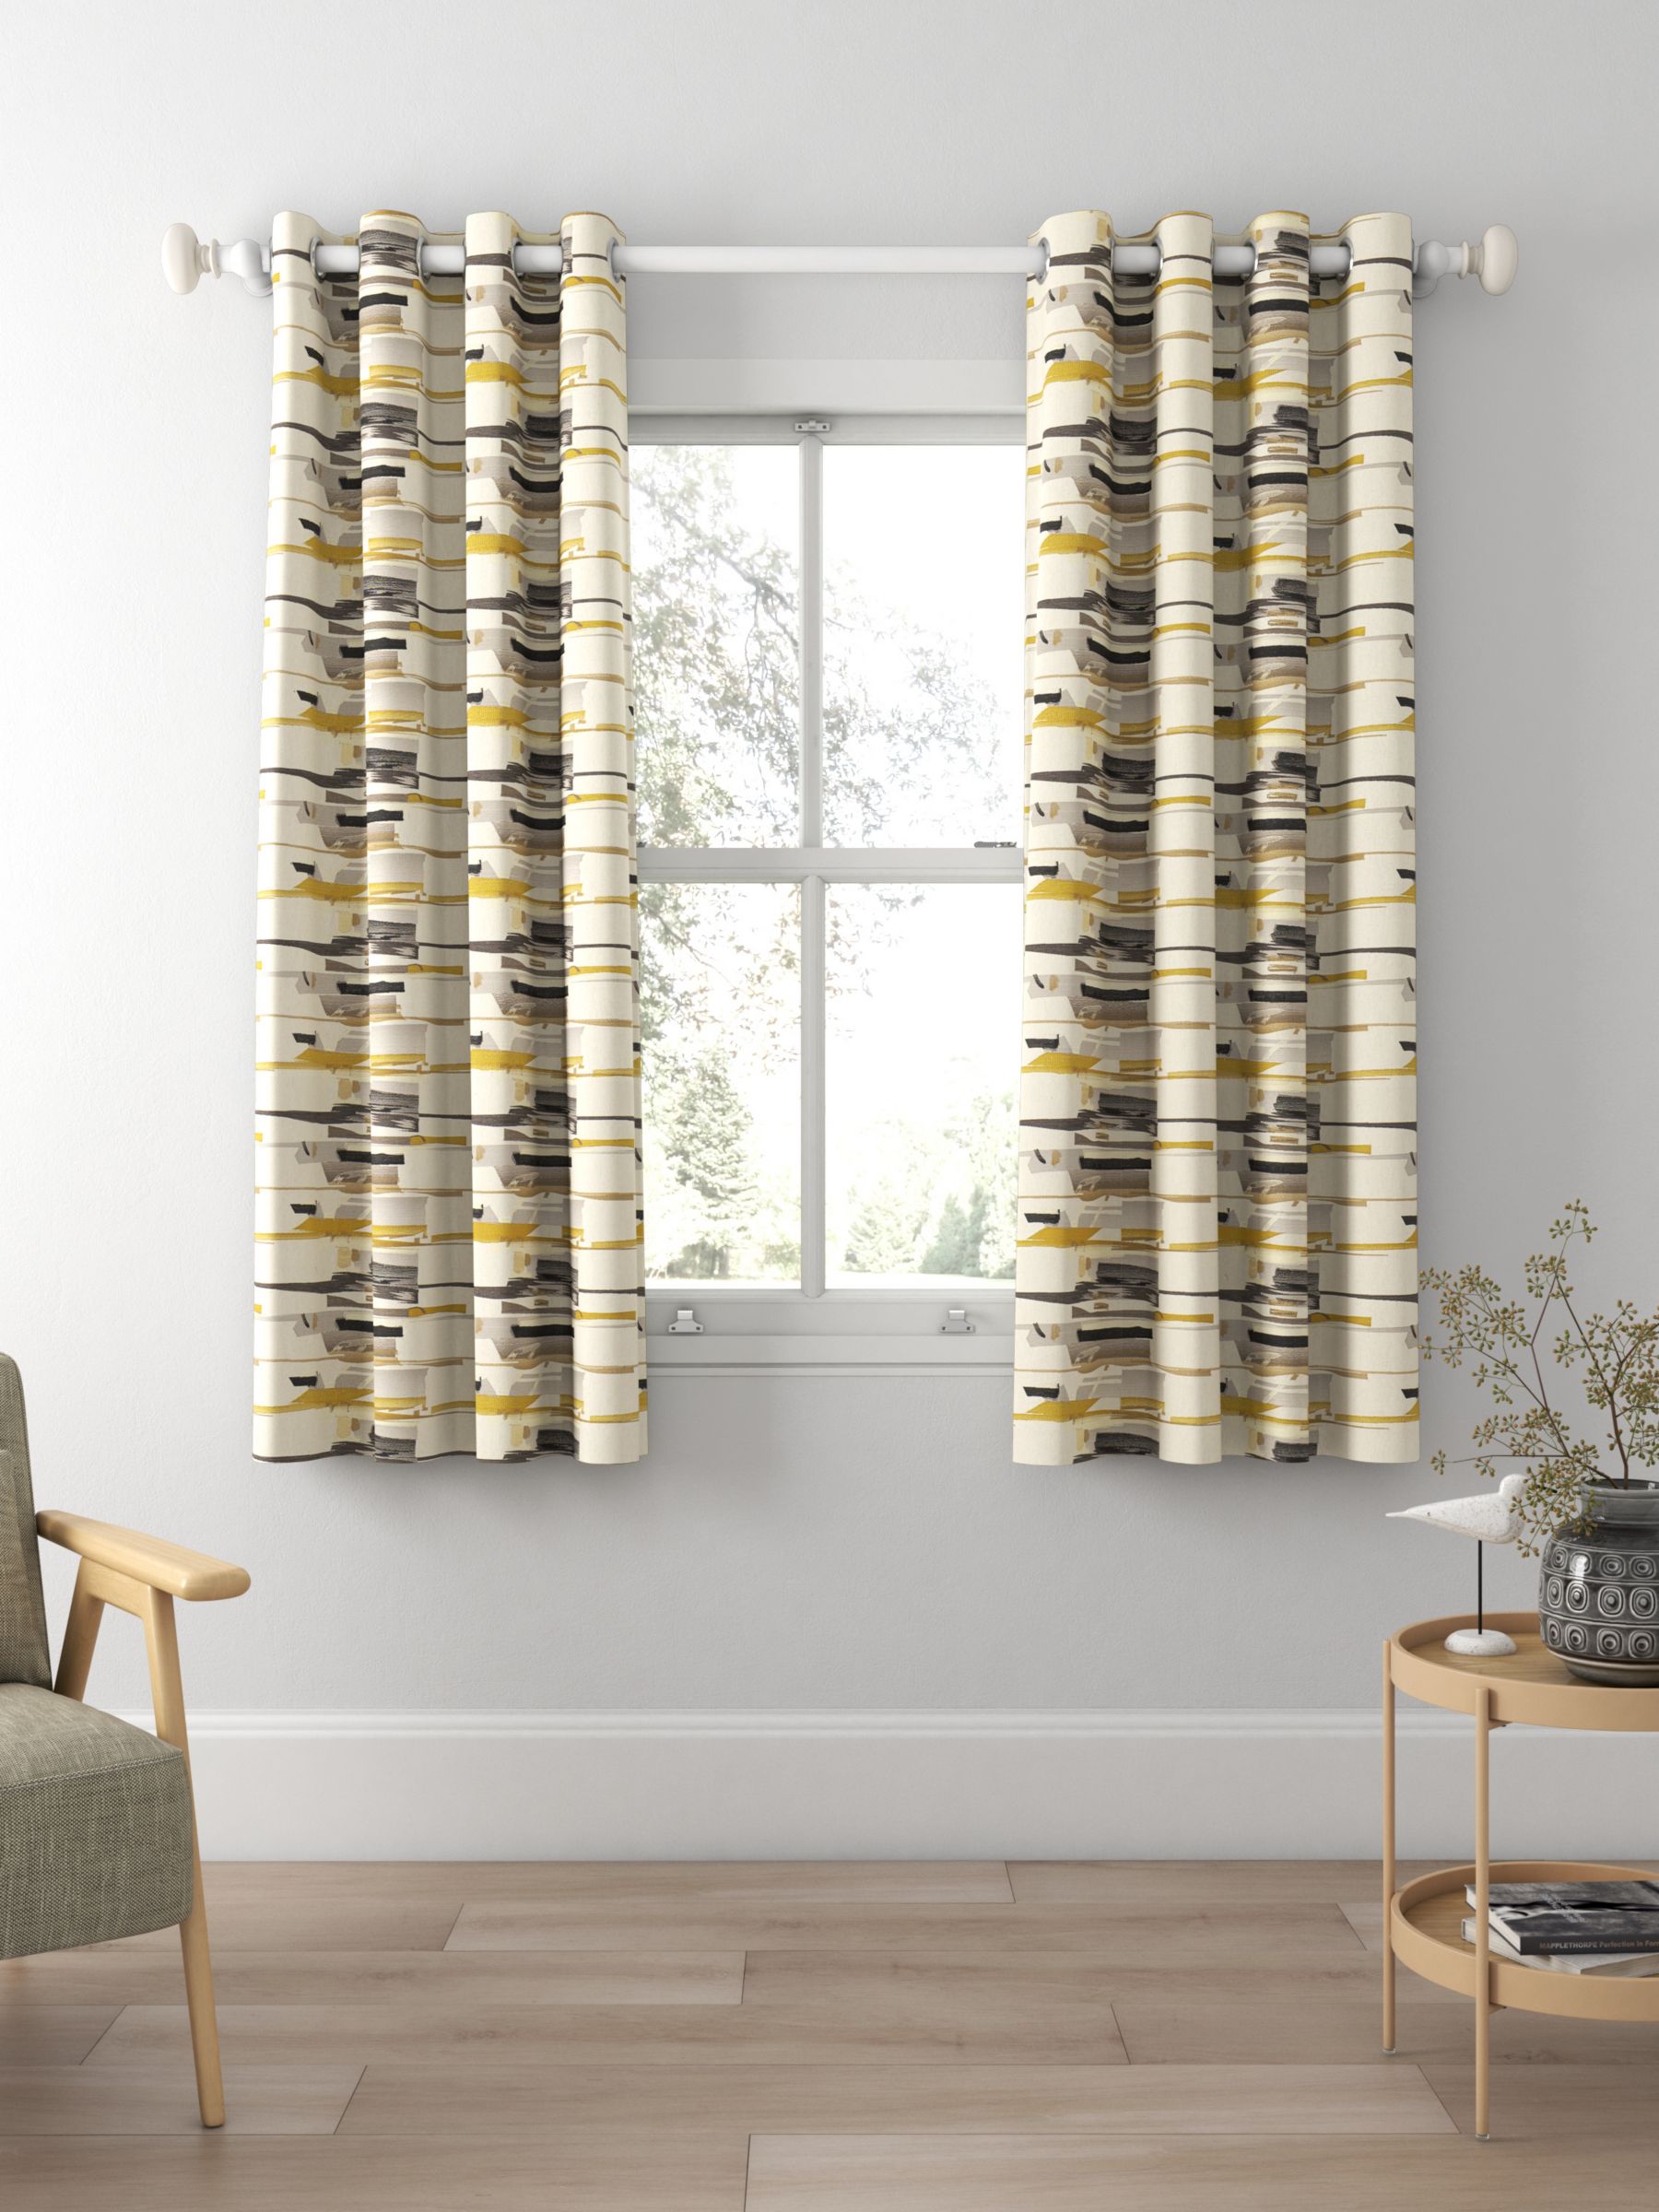 Harlequin Momentum 4 Made to Measure Curtains, Charcoal/Onyx